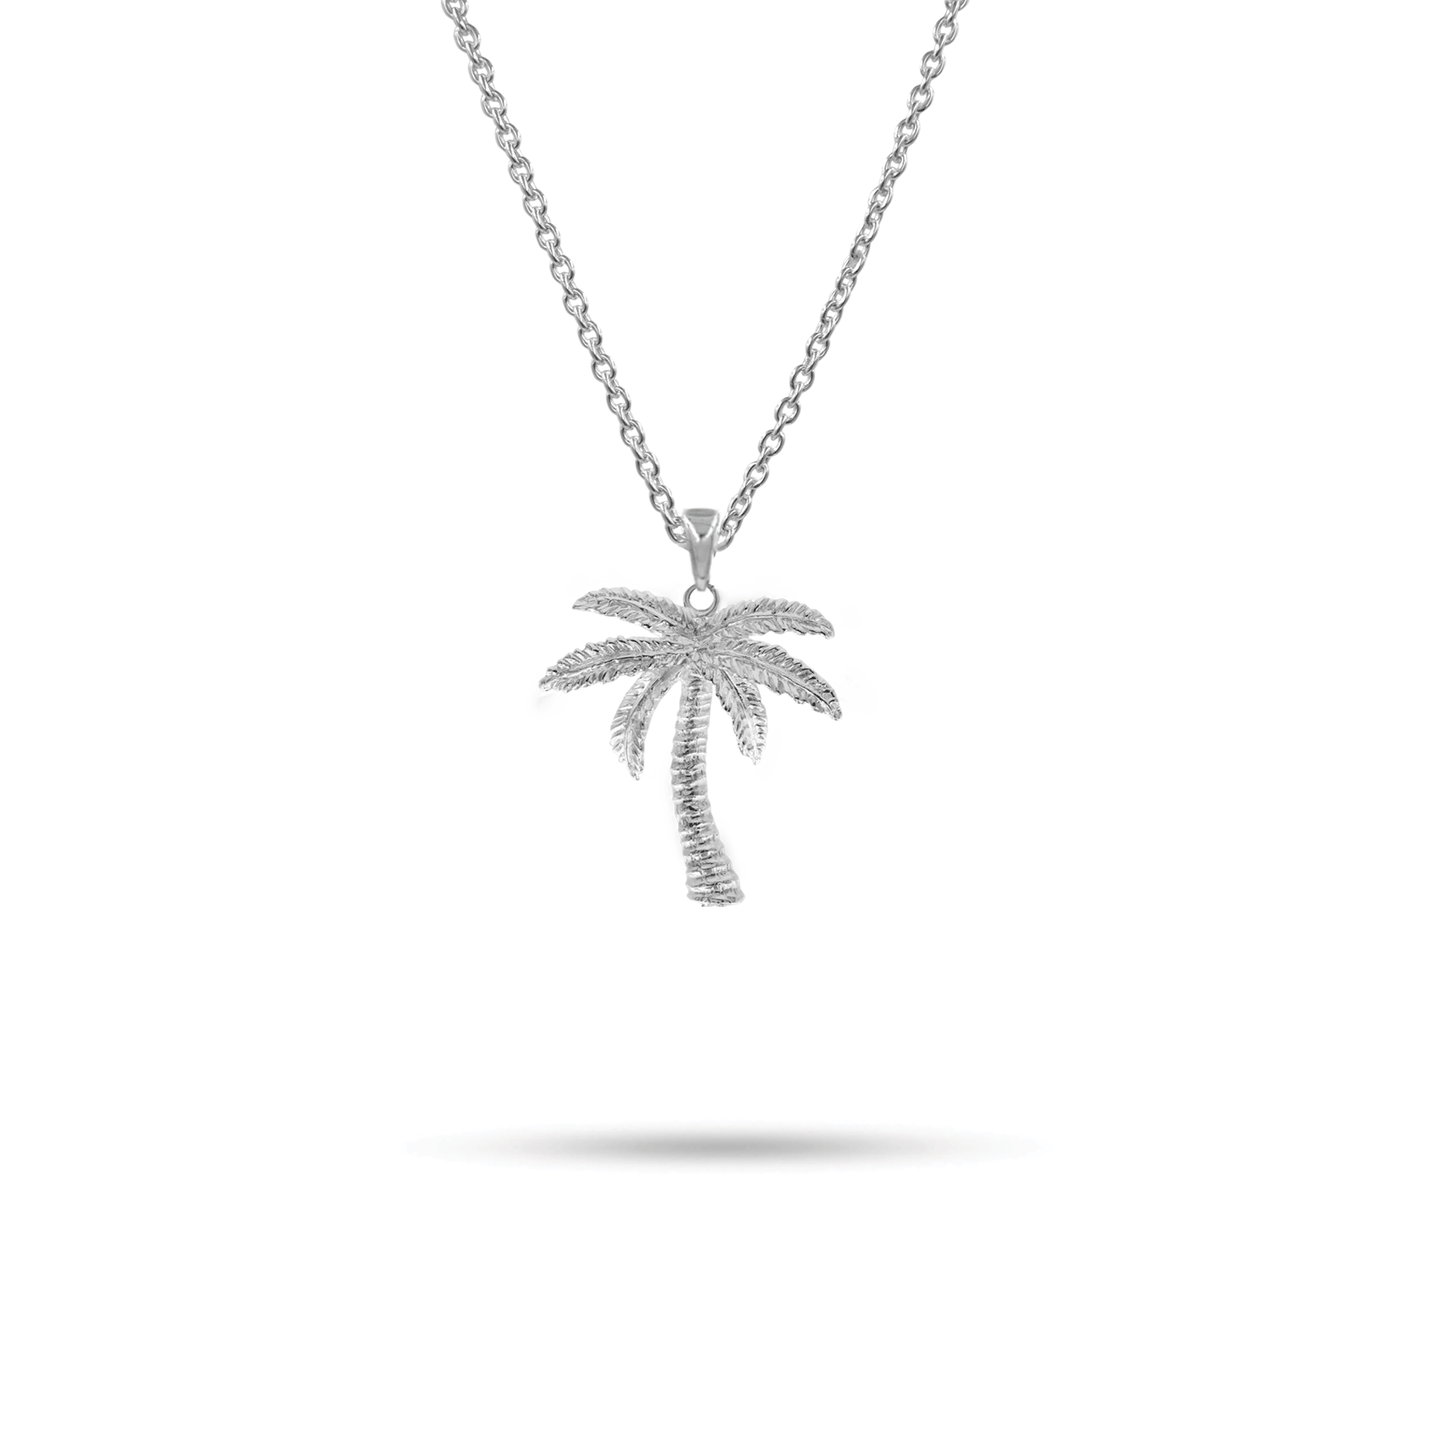 Palm tree pendant necklace sterling silver